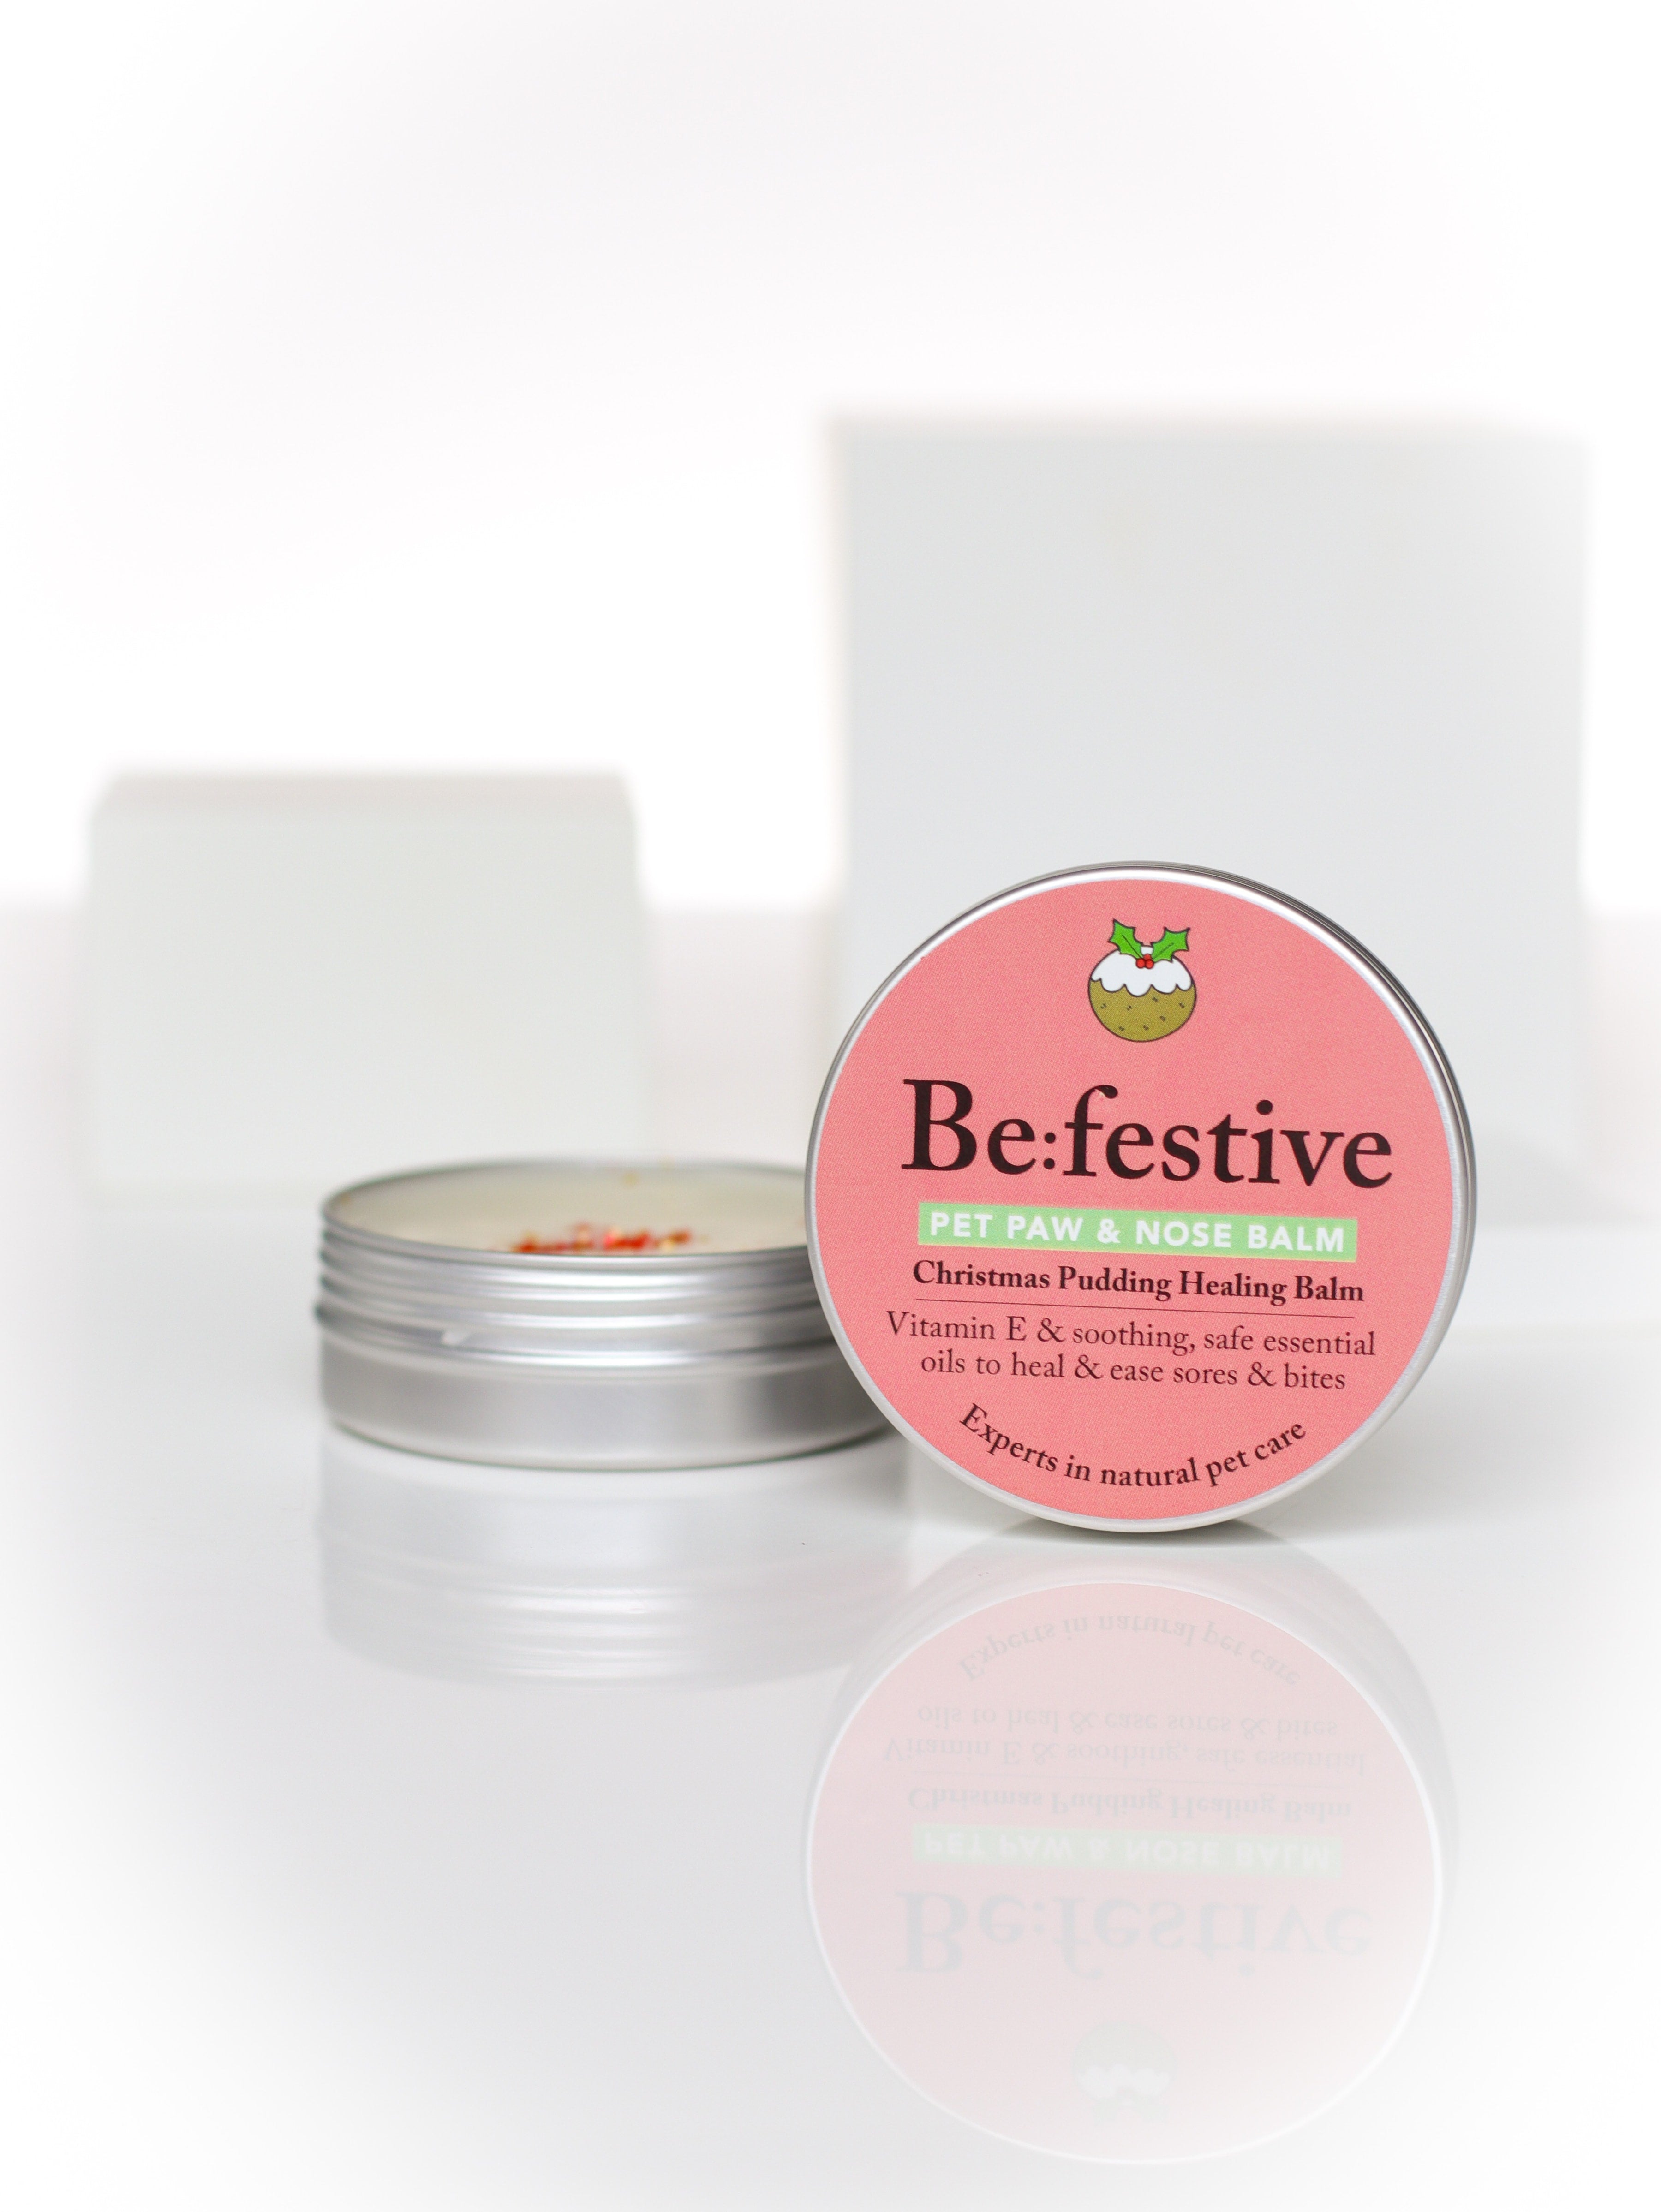 Be:Festive balm with the lid off, showing product